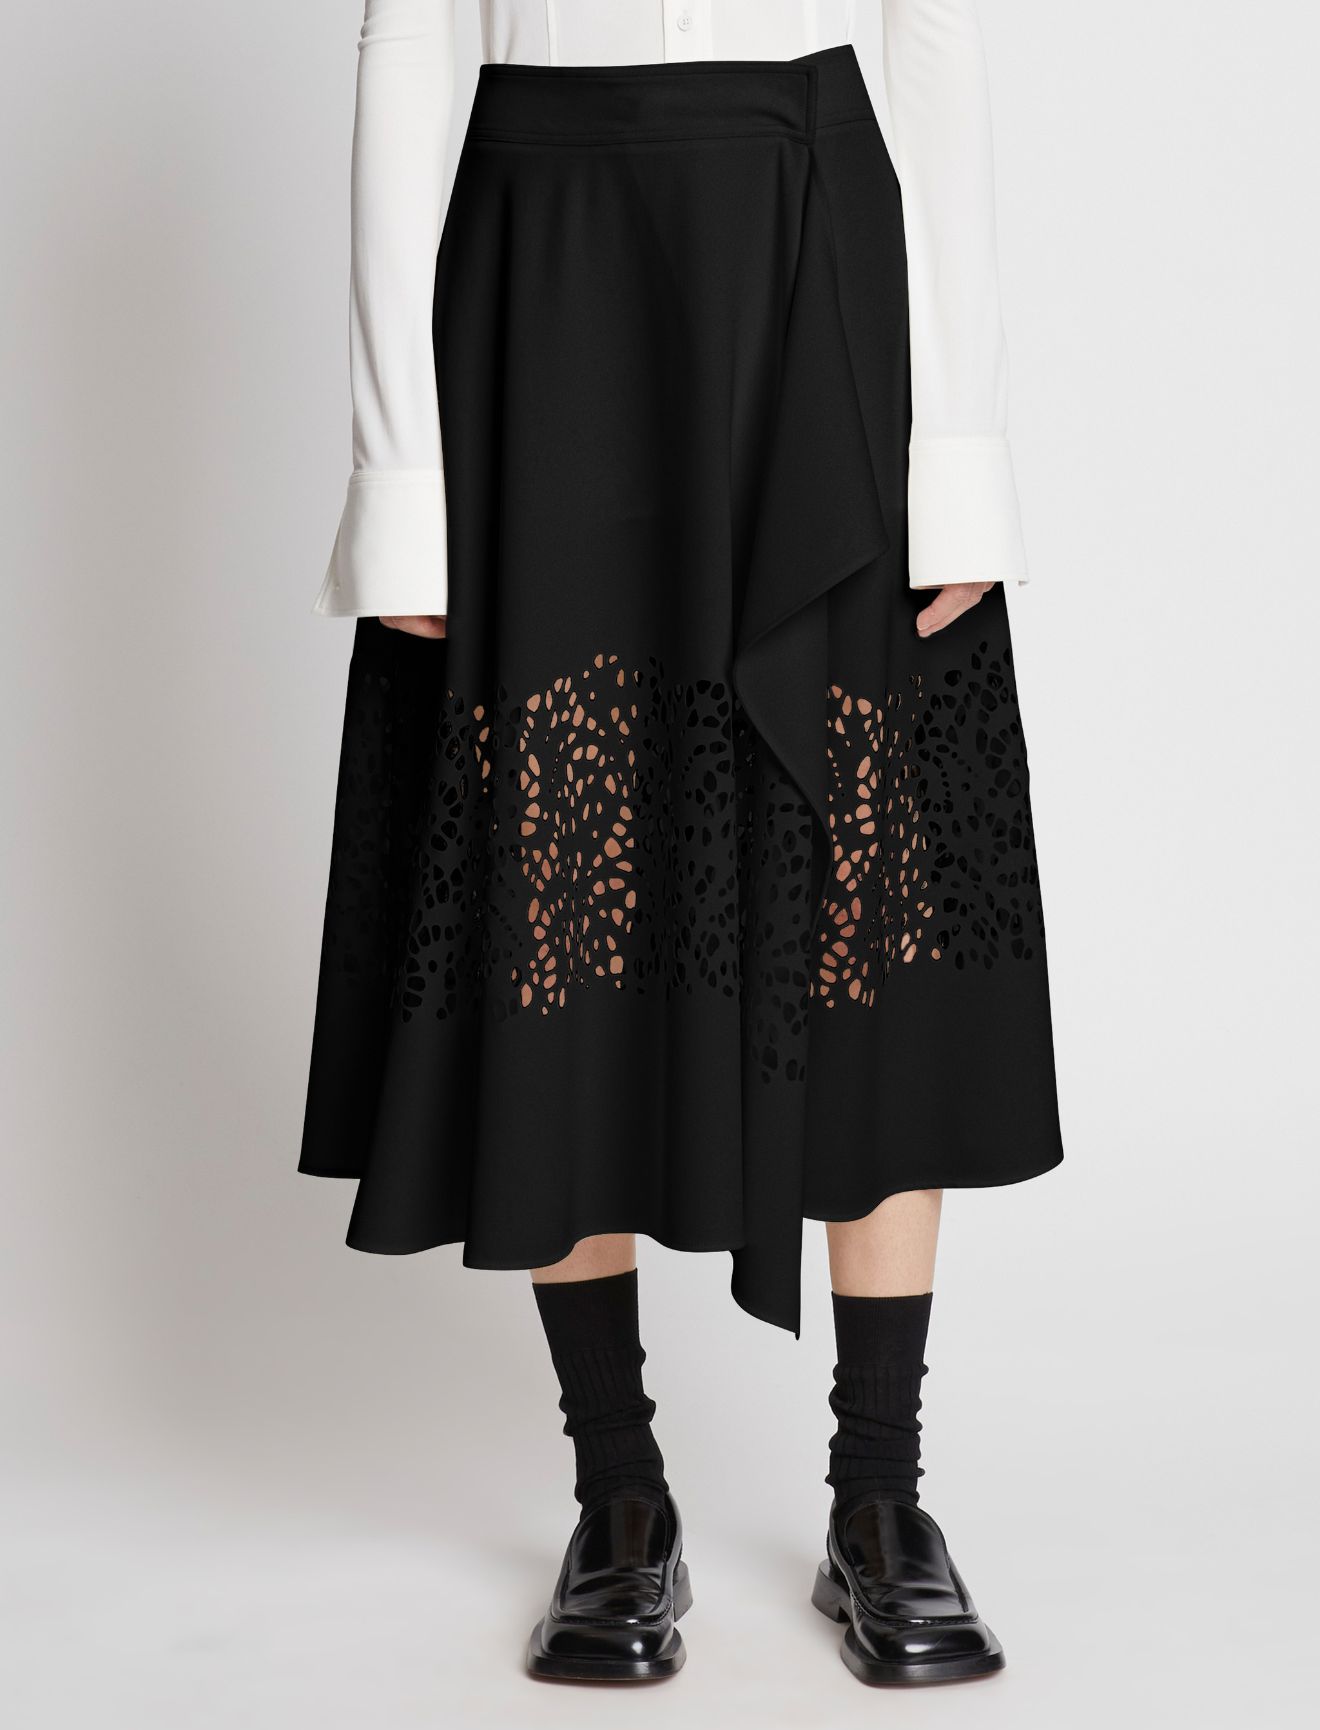 Broderie Anglaise Skirt in black | Proenza Schouler